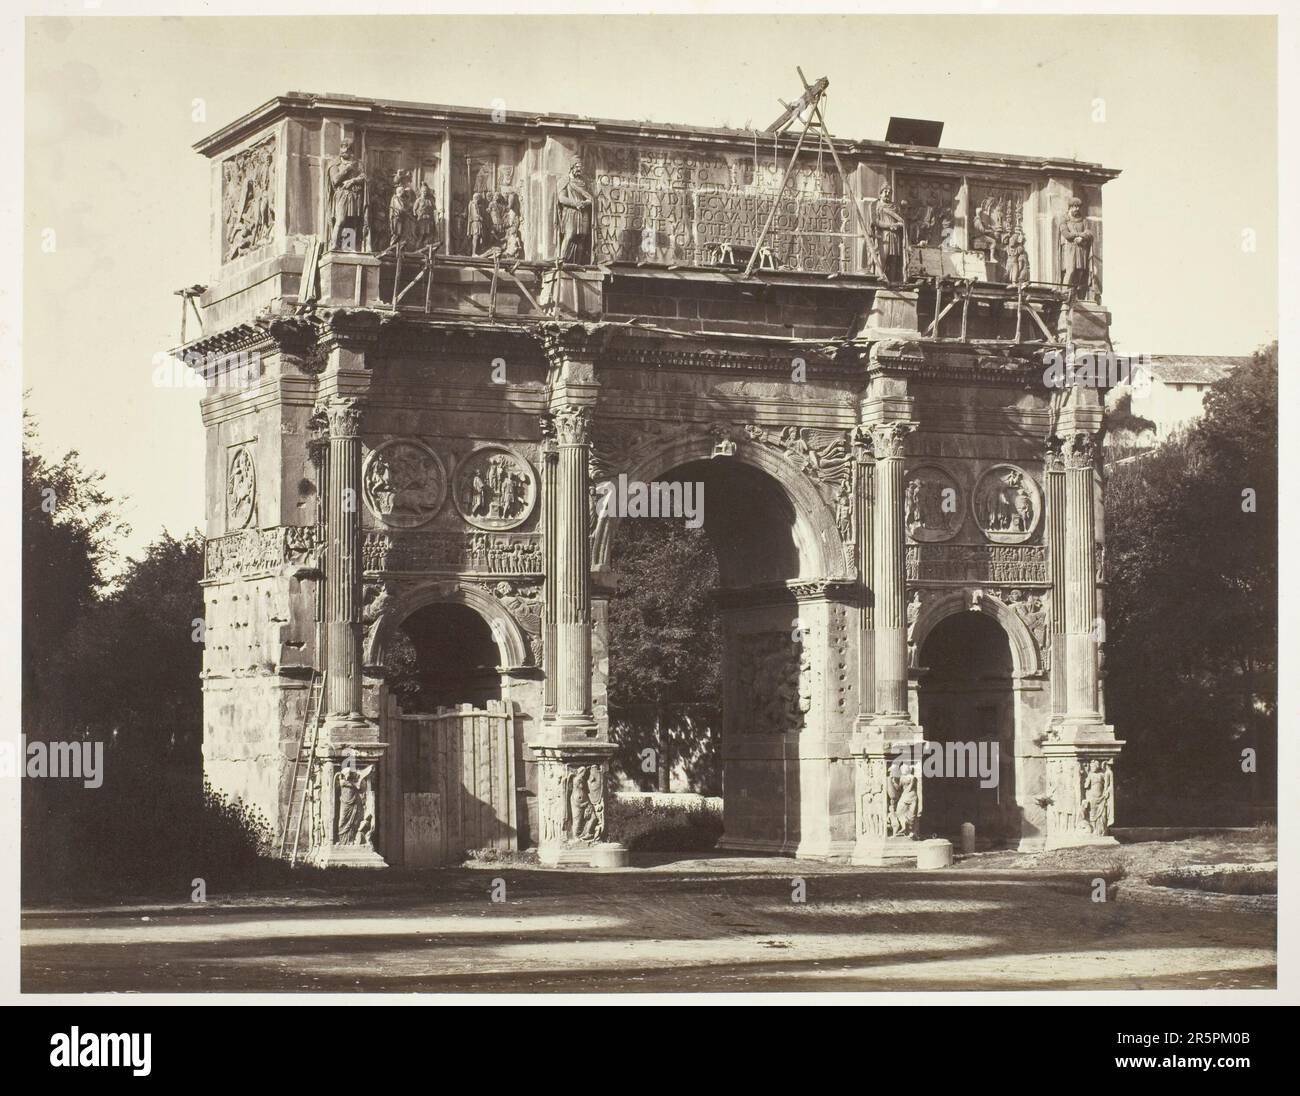 Arch of Constantine, Rome Date: 1854/55, printed c. 1863 Artist: Bisson Frères (Louis-Auguste Bisson, French, 1814–1876 and Auguste-Rosalie Bisson, Fr Stock Photo